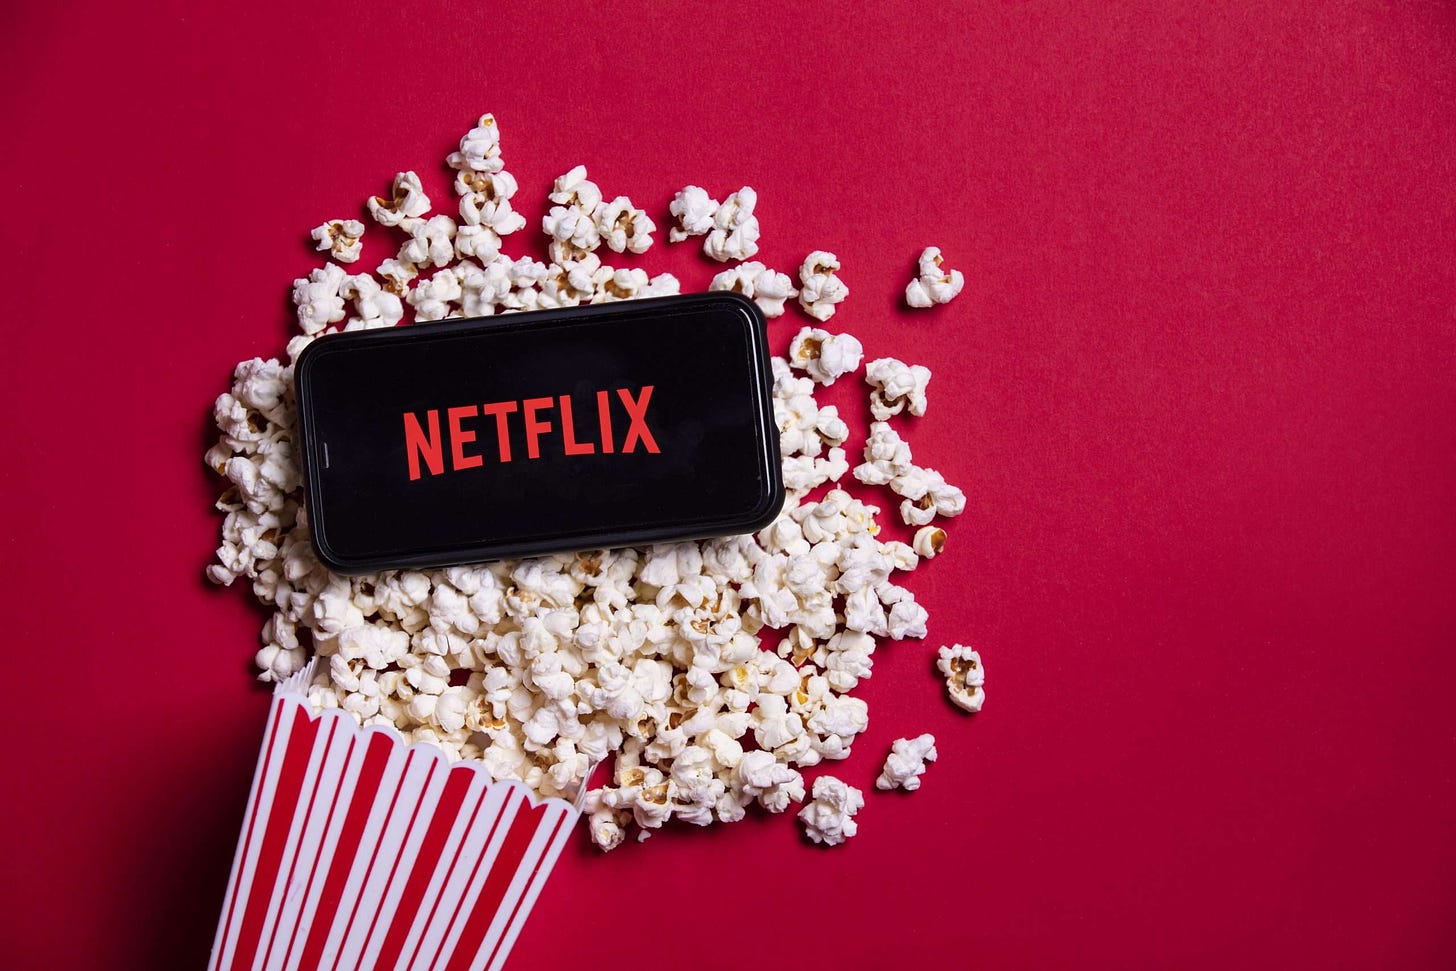 How Netflix Used Psychology to Perfect Its Customer Experience